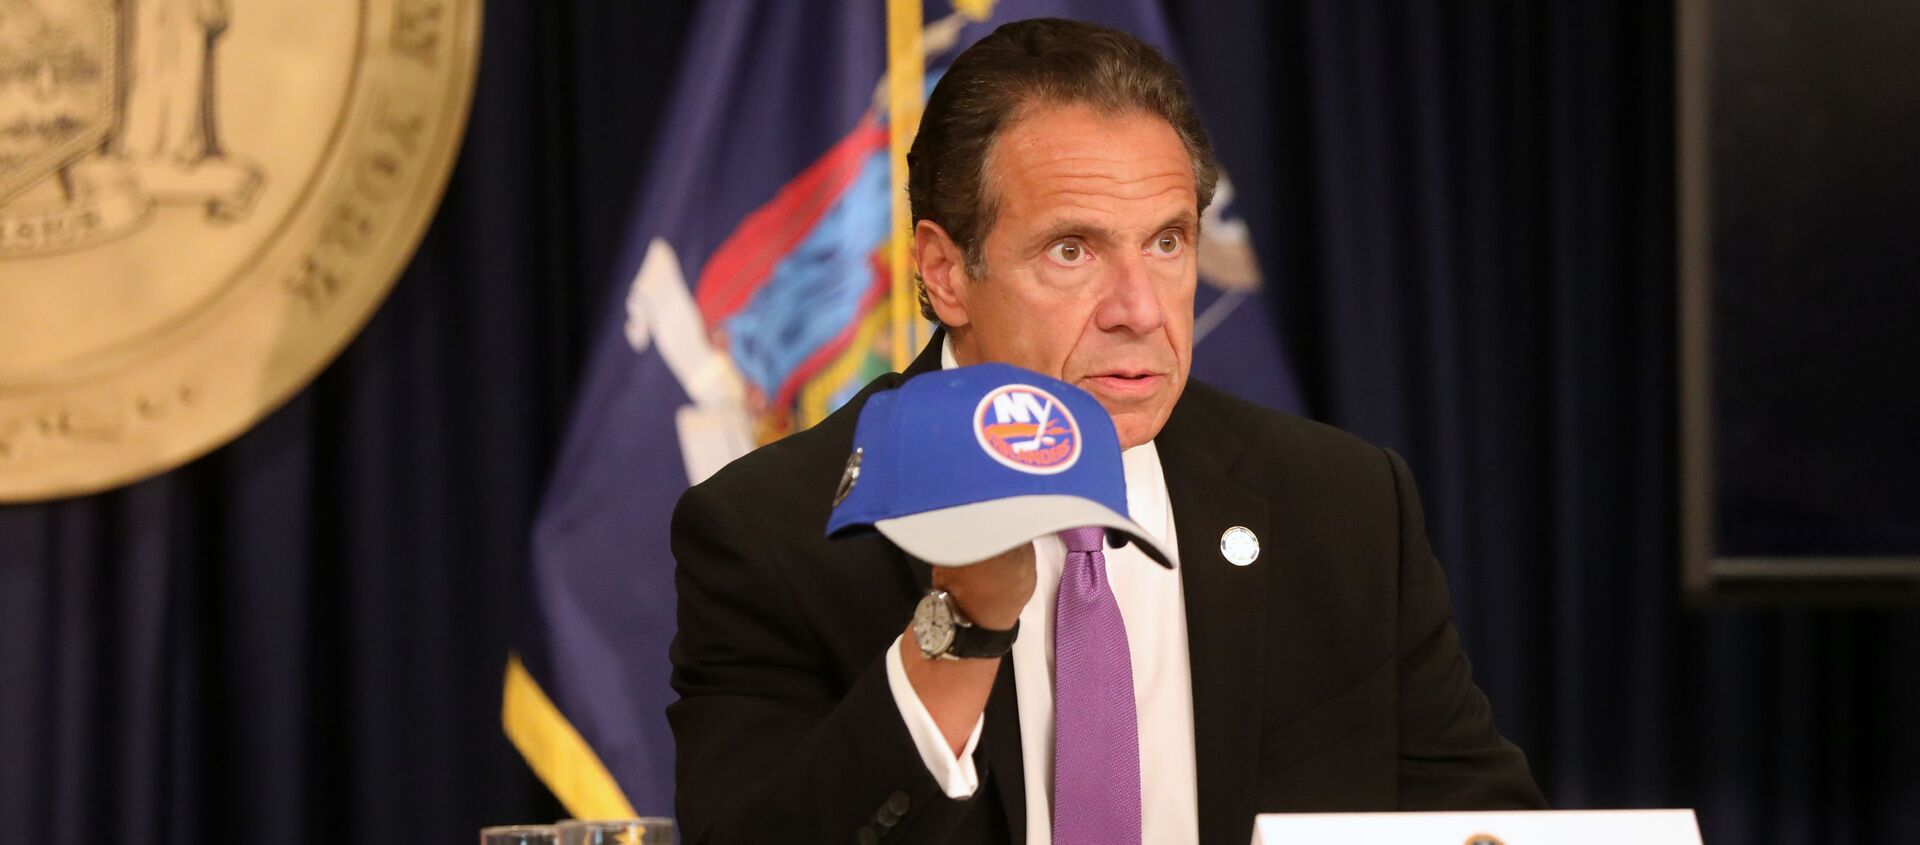 SEPTEMBER 08: New York state Gov. Andrew Cuomo holds an NHL New York Islanders hat at a news conference on September 08, 2020 in New York City. Cuomo, though easing restrictions on casinos and malls throughout the state, has declined to do so for indoor dining in restaurants in New York City despite pressure from business owners, citing struggles by the city to enforce the state's previous orders. - Sputnik International, 1920